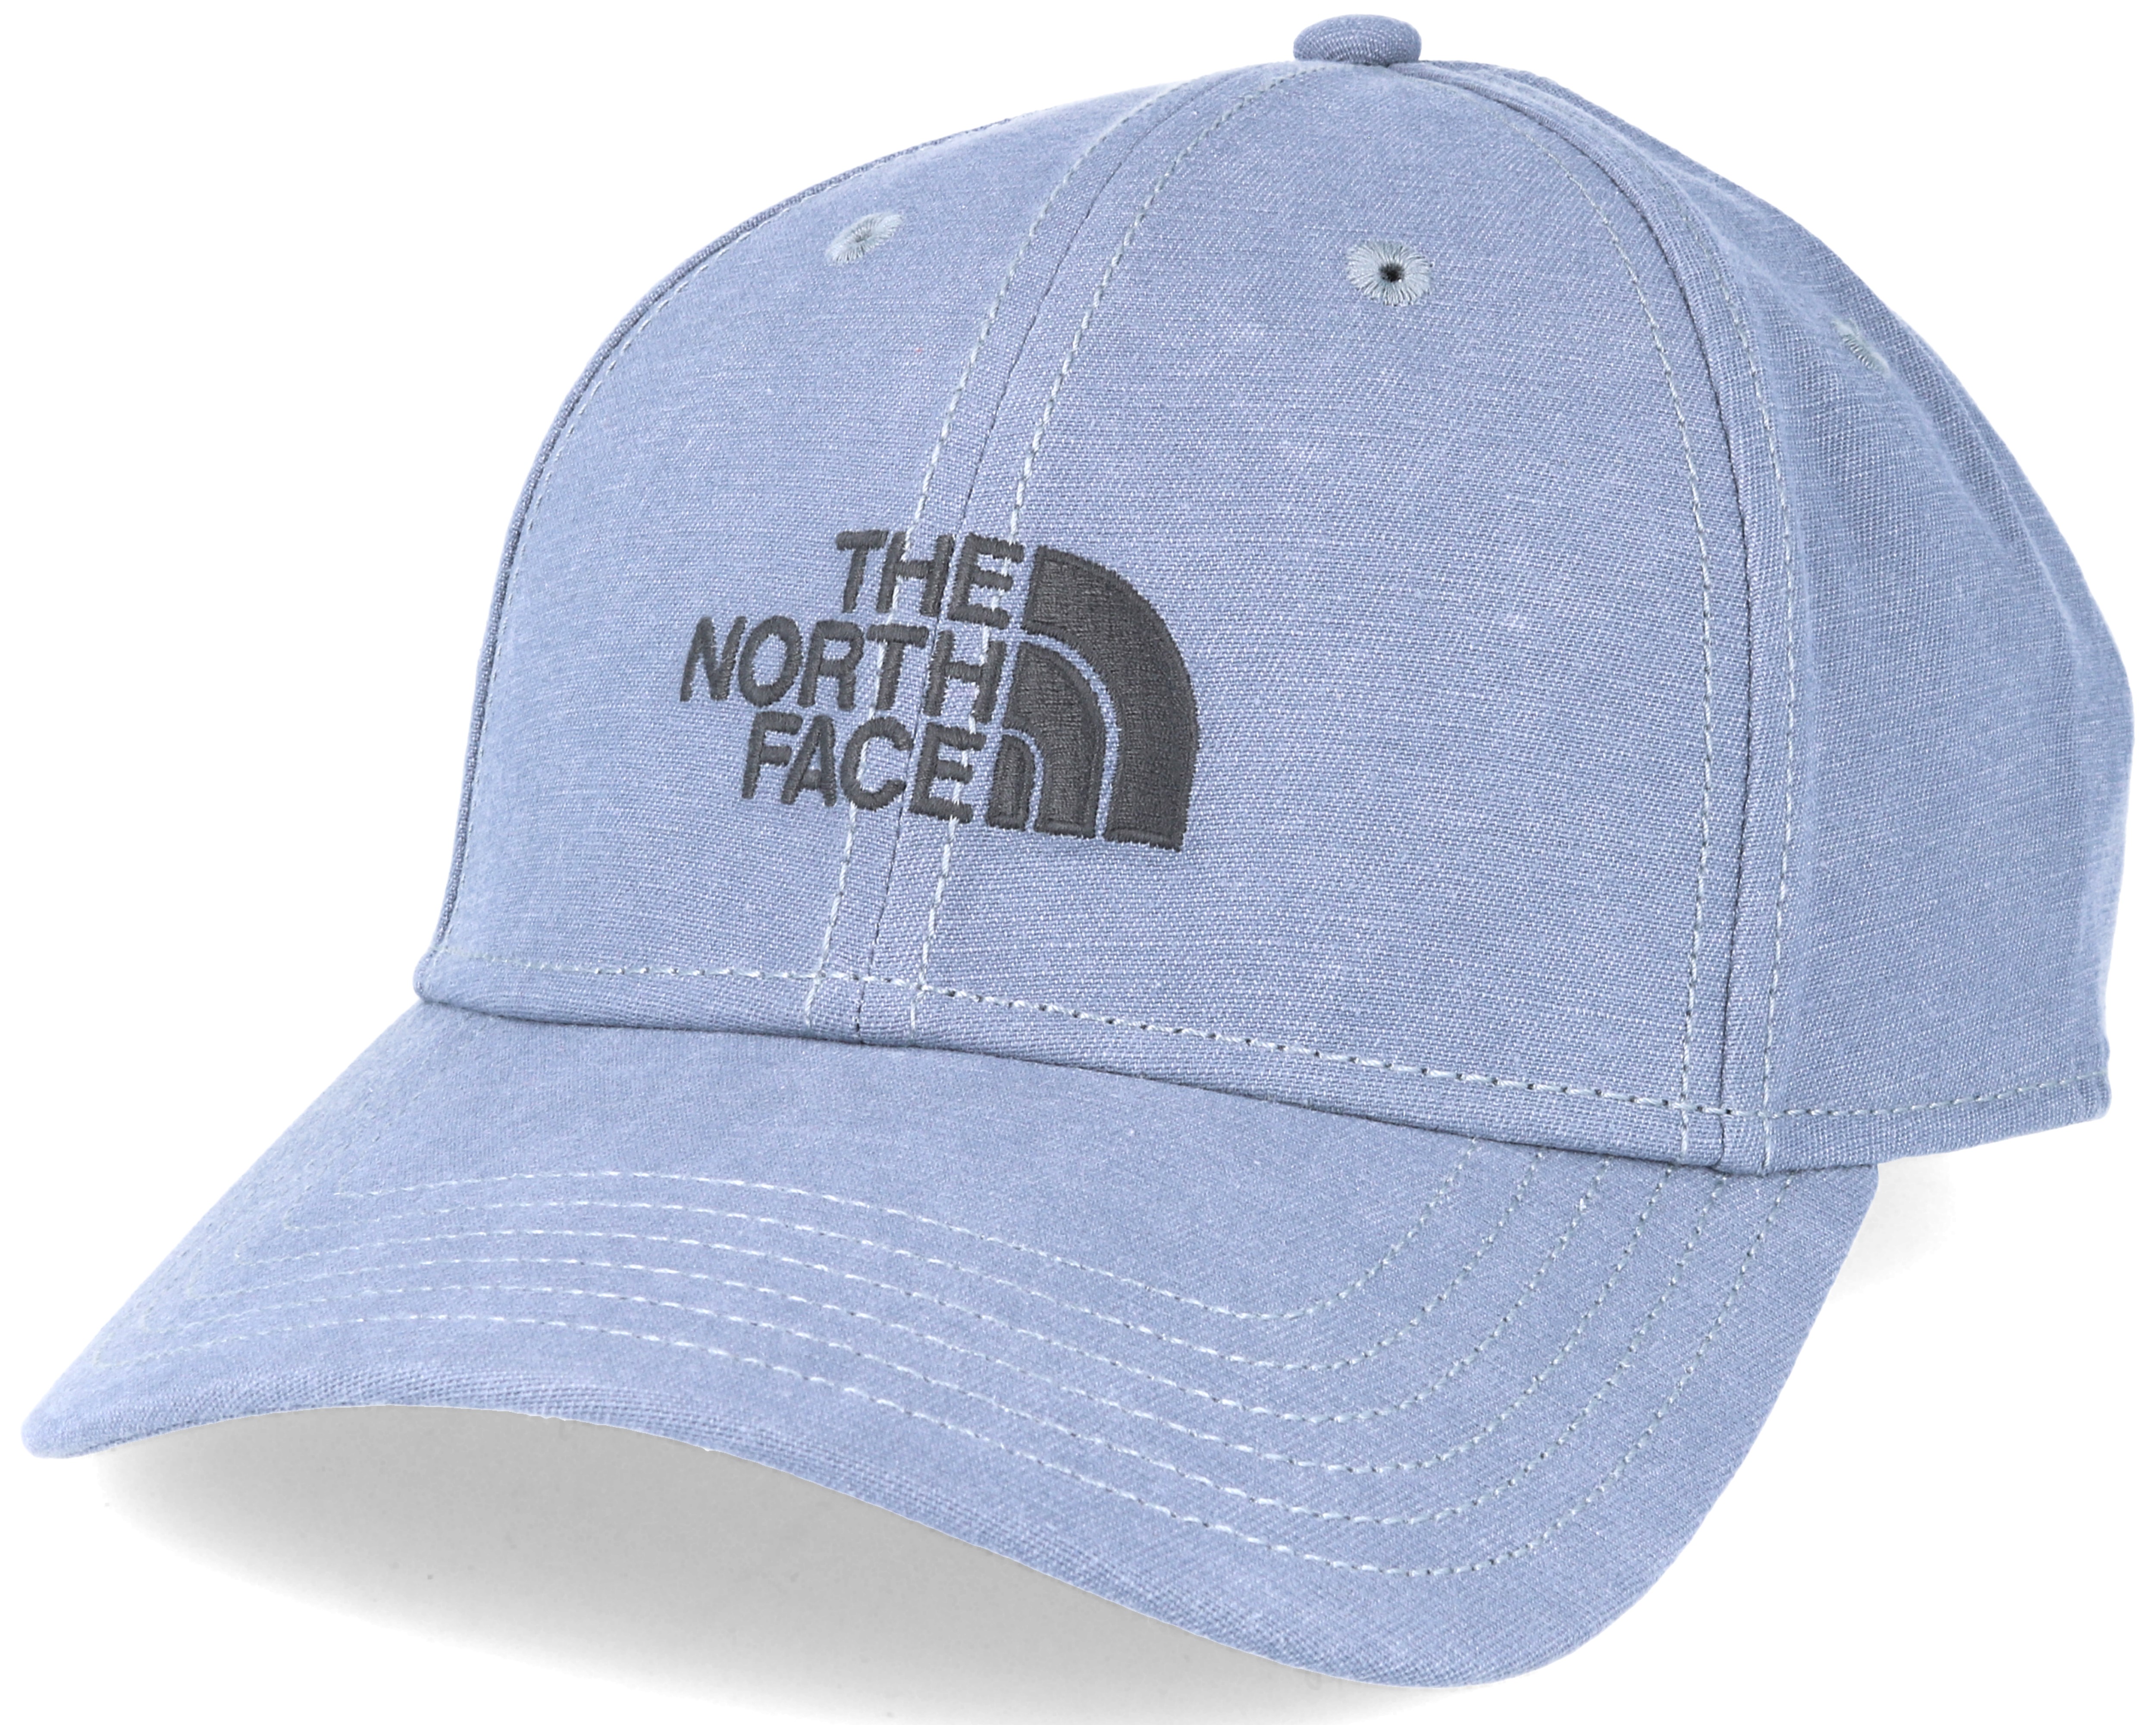 66 Classic Mid Grey Adjustable - The North Face caps | Hatstore.co.uk